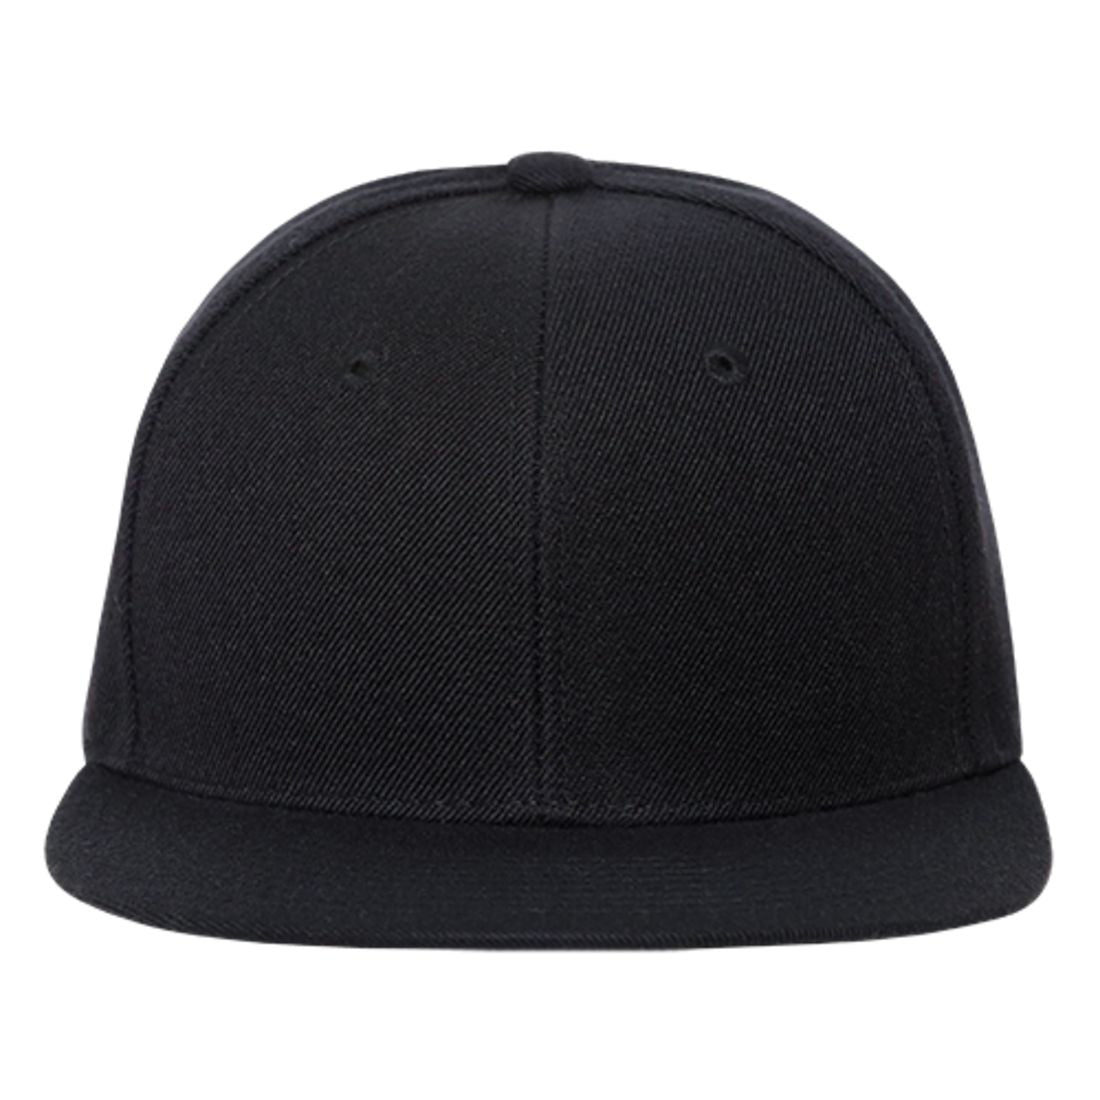 Decky 362 Structured High Profile Snapback Hats 6 Panel Flat Bill Caps Wholesale